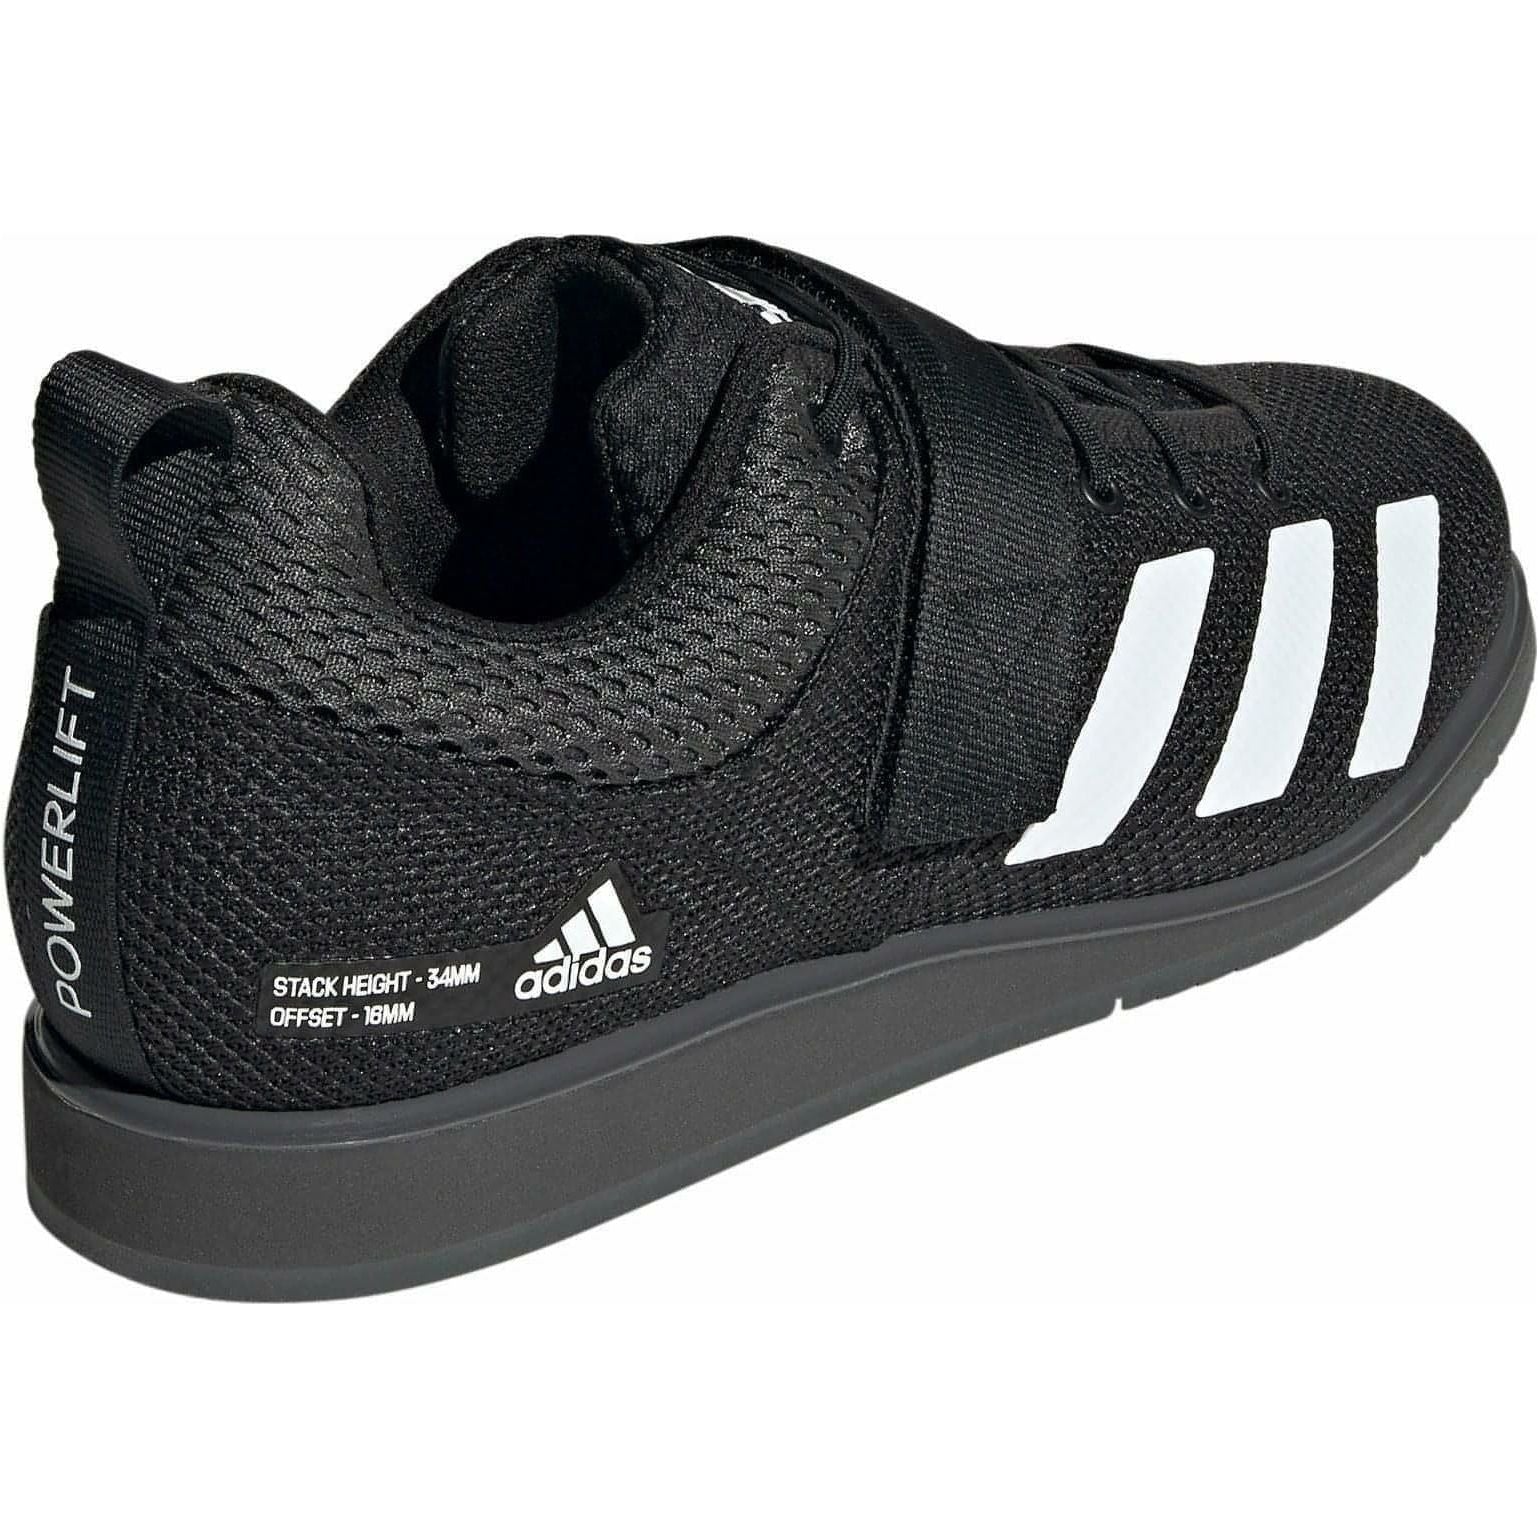 Adidas Powerlift Gy8918 Back View